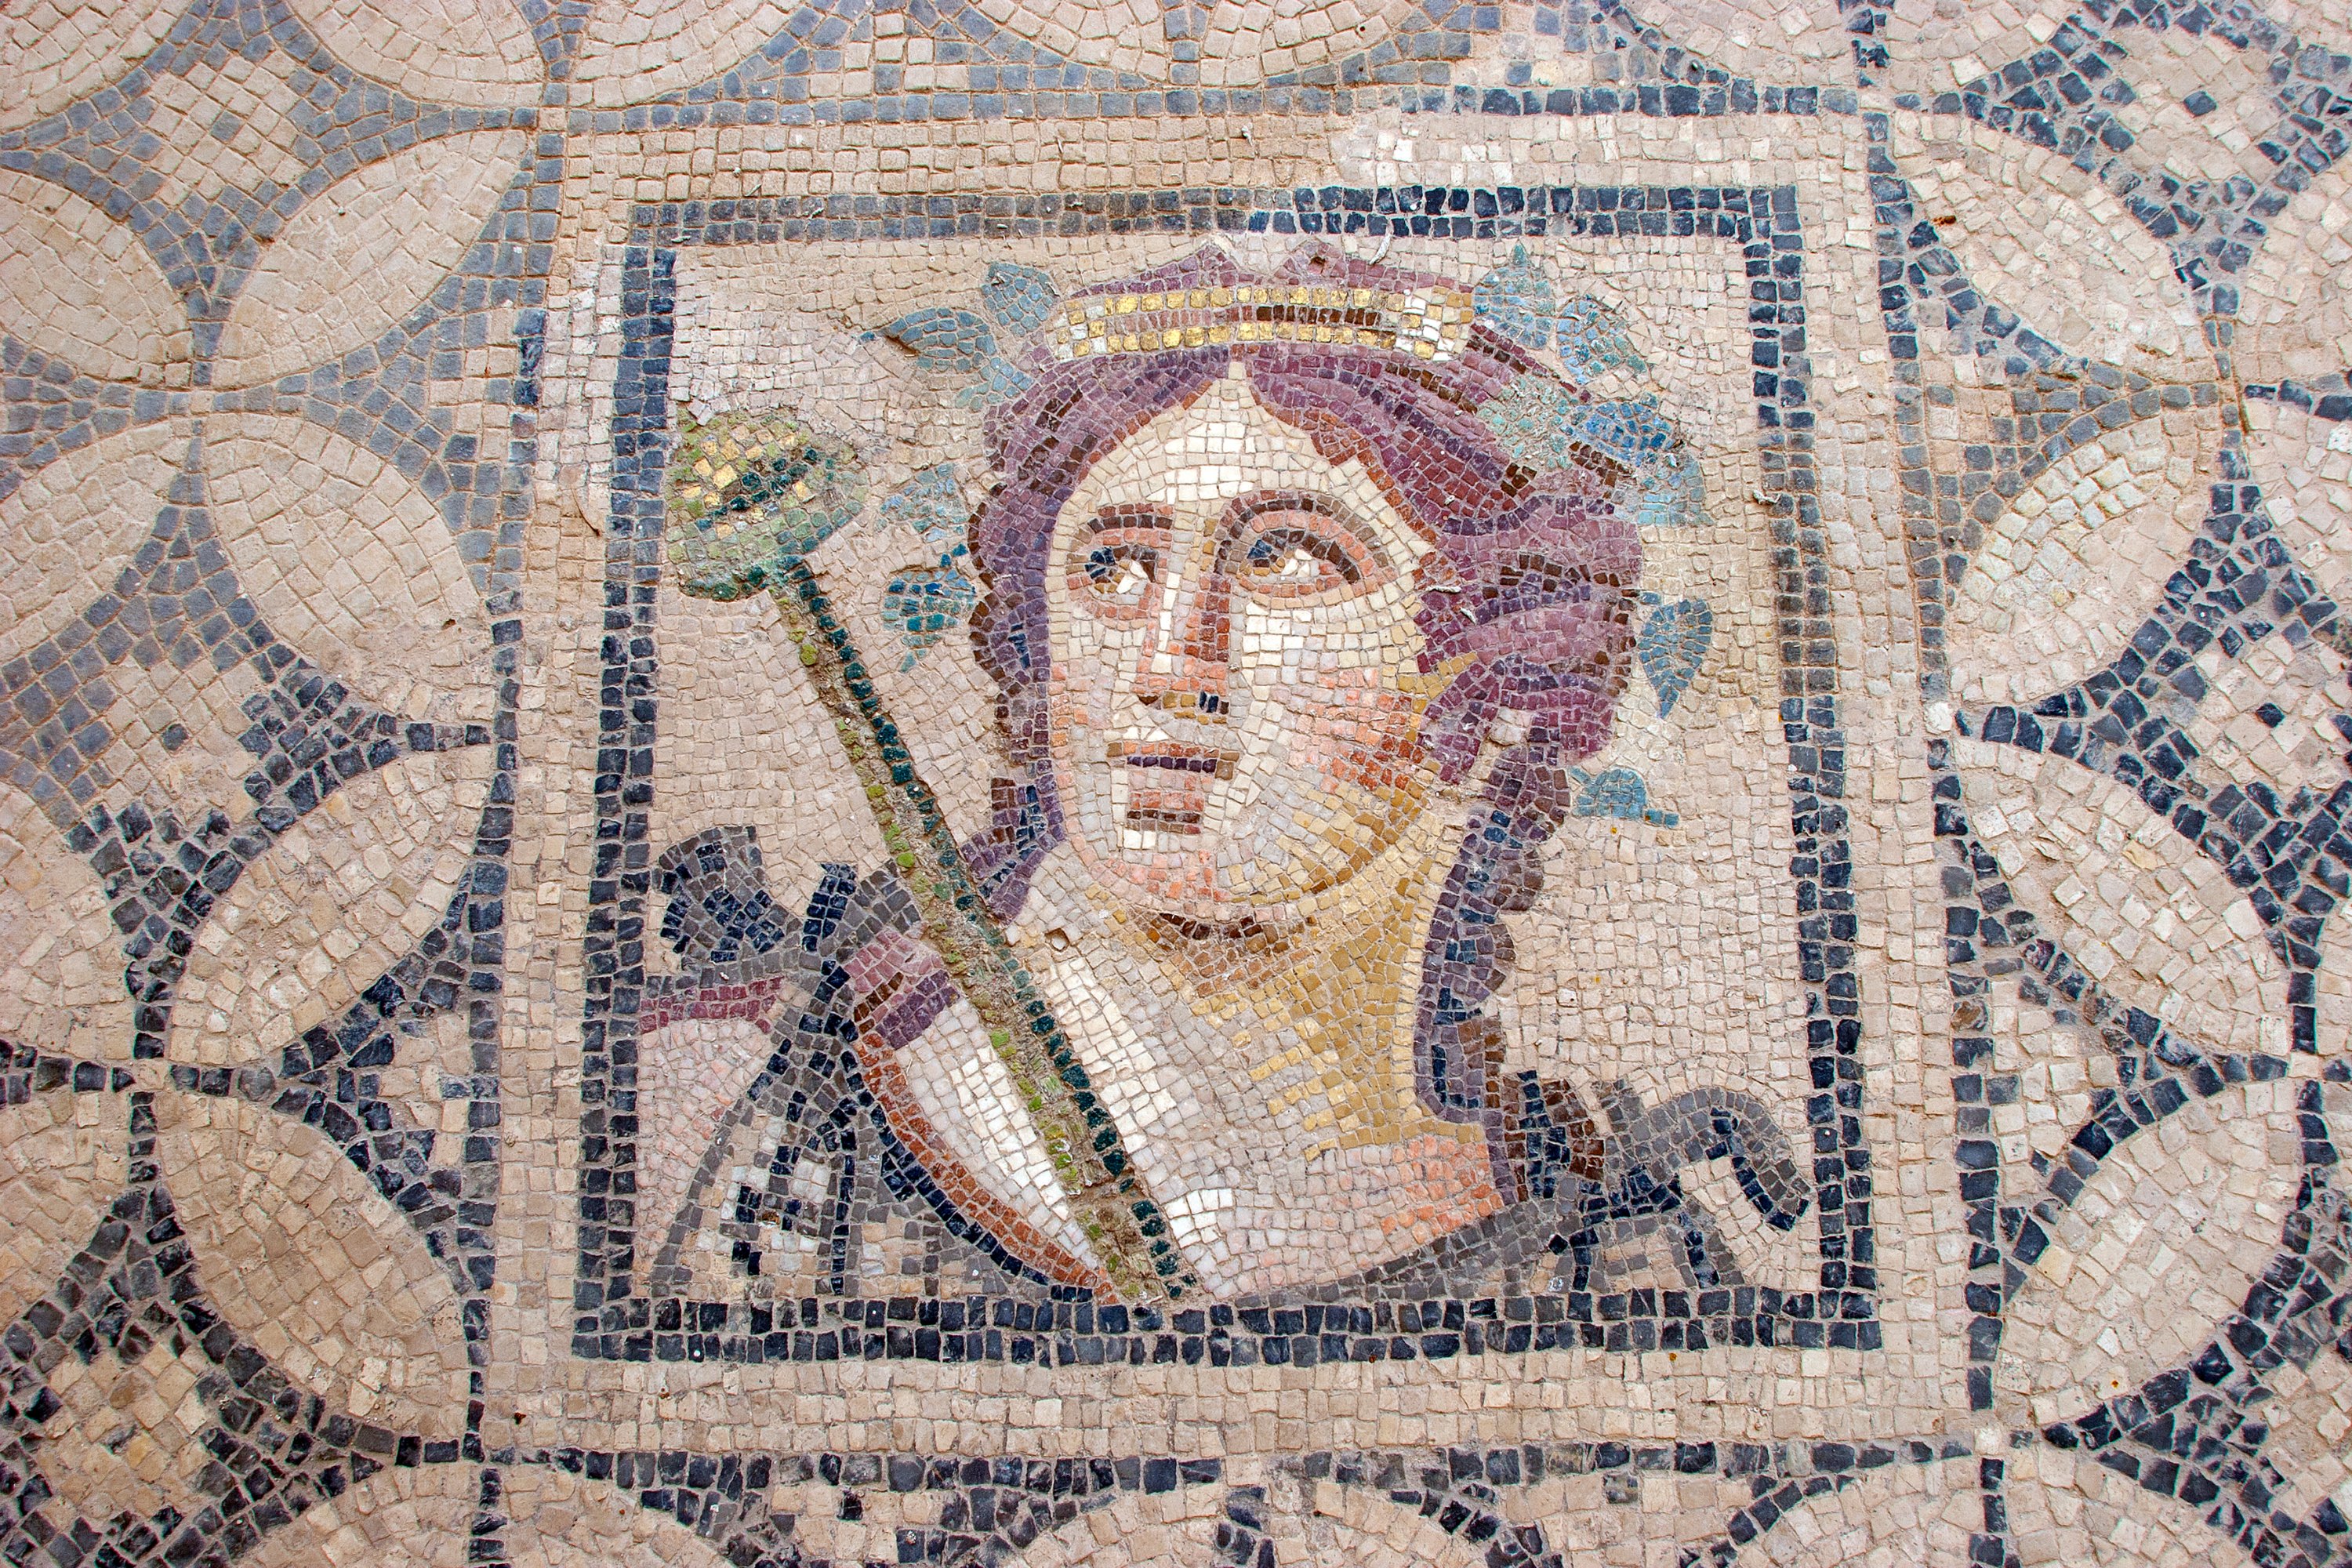 An ancient Roman mosaic from the terrace houses in Ephesus, Turkey, June 11, 2005. (iStock Photo)